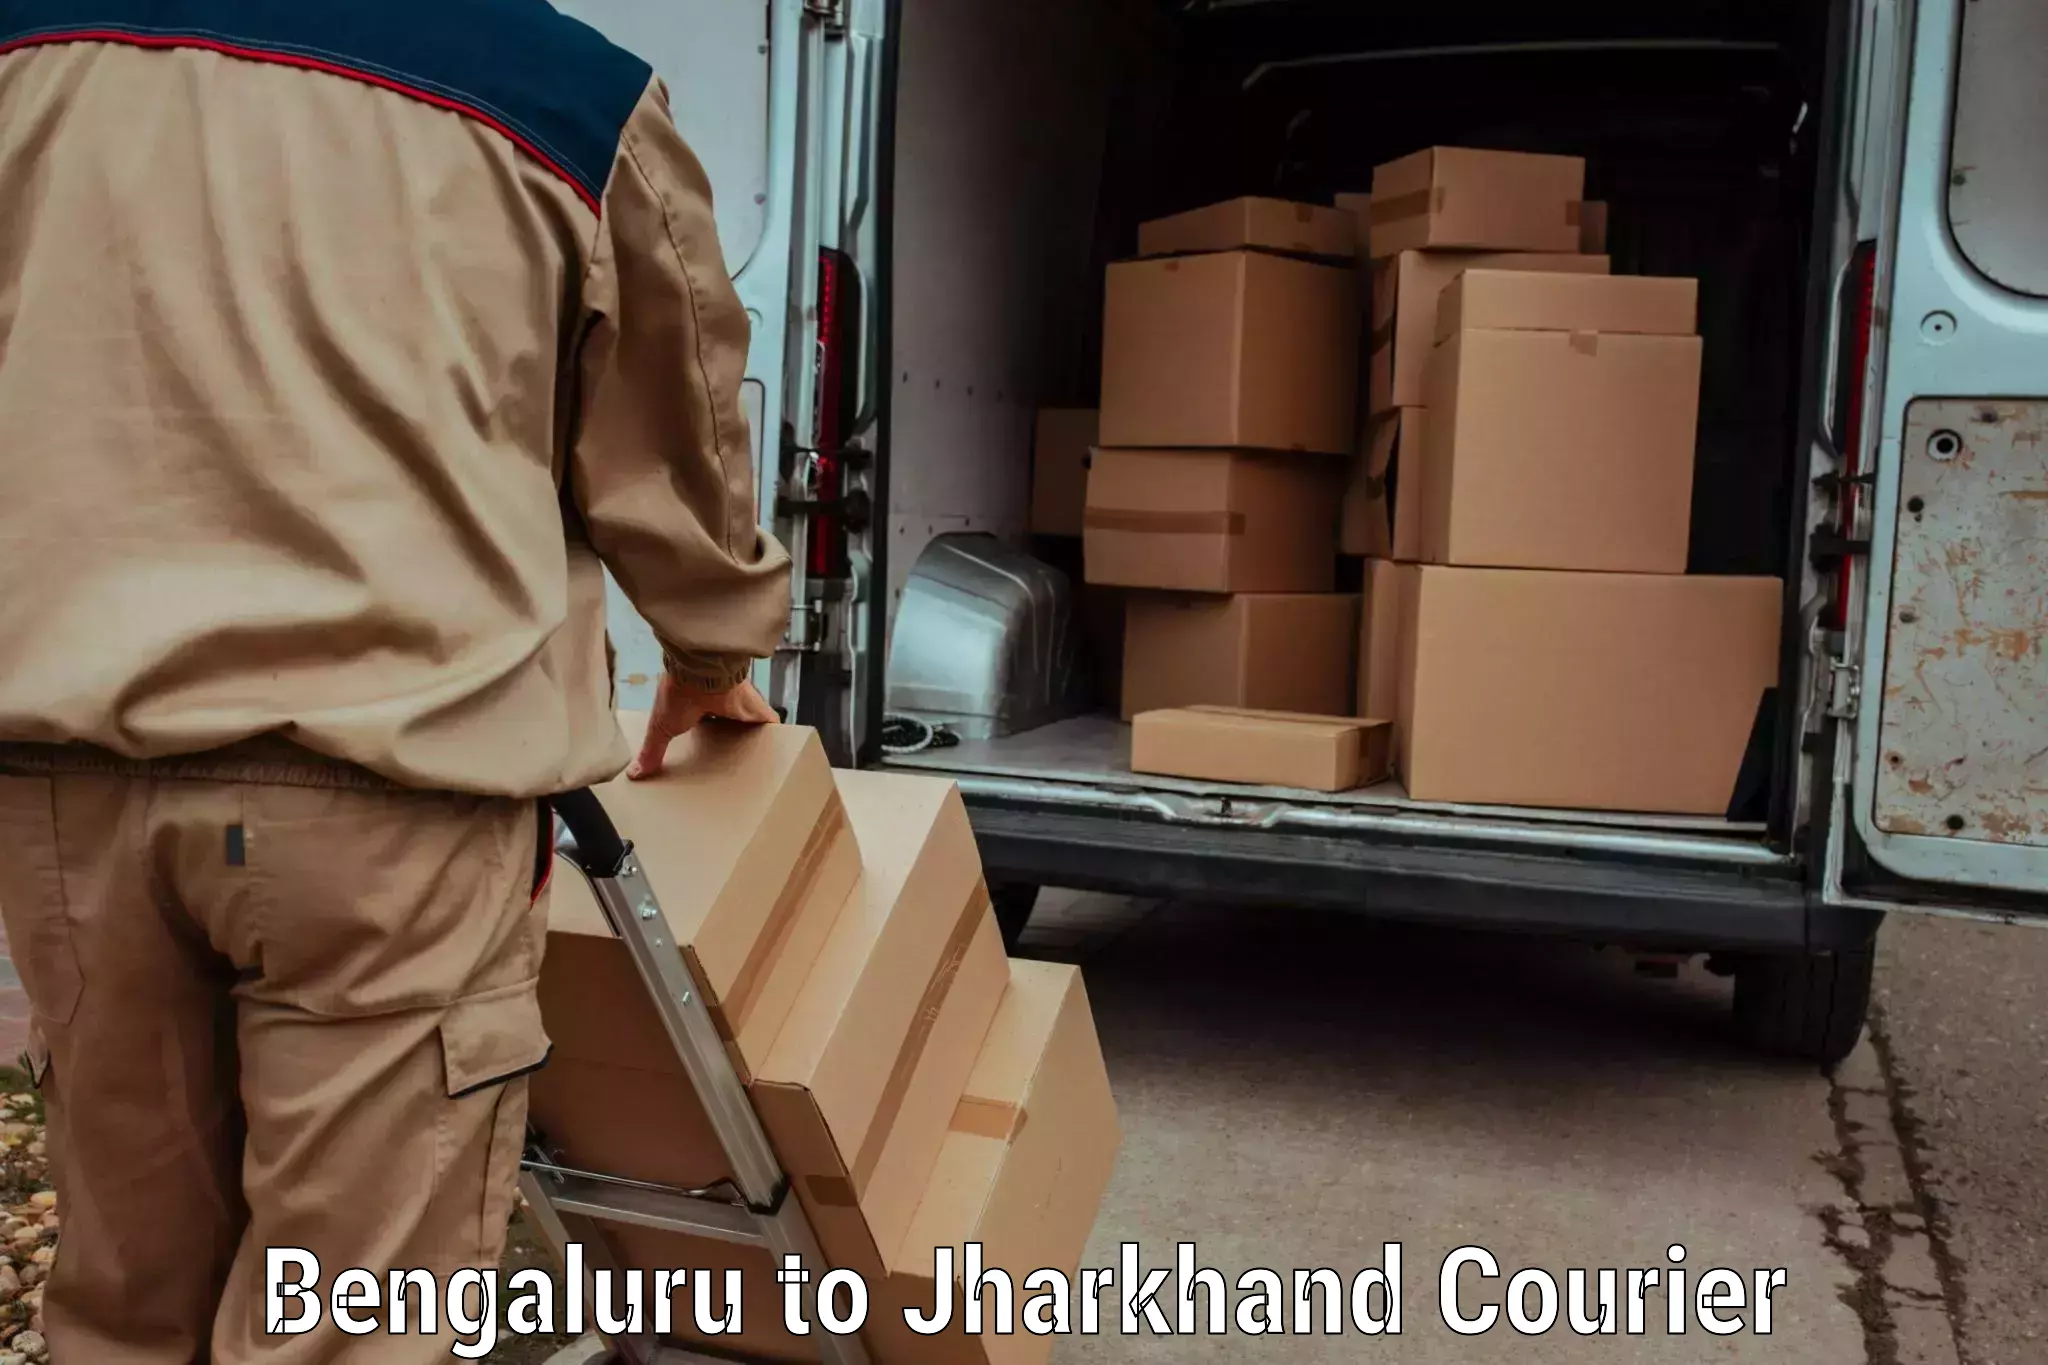 Express delivery network in Bengaluru to Dhalbhumgarh